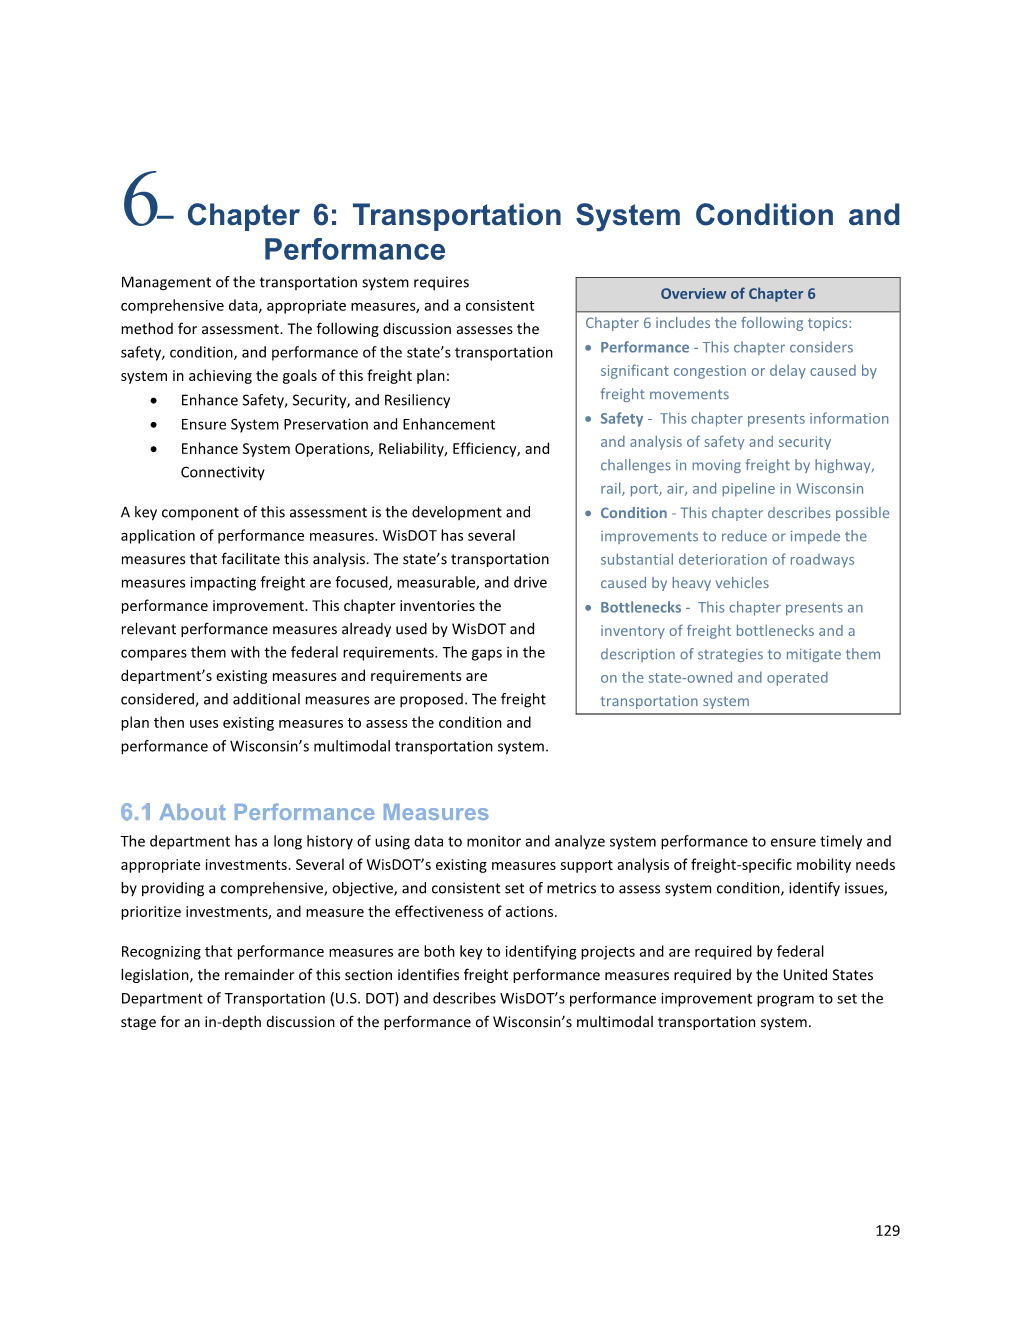 Chapter 6: Transportation System Condition and Performance